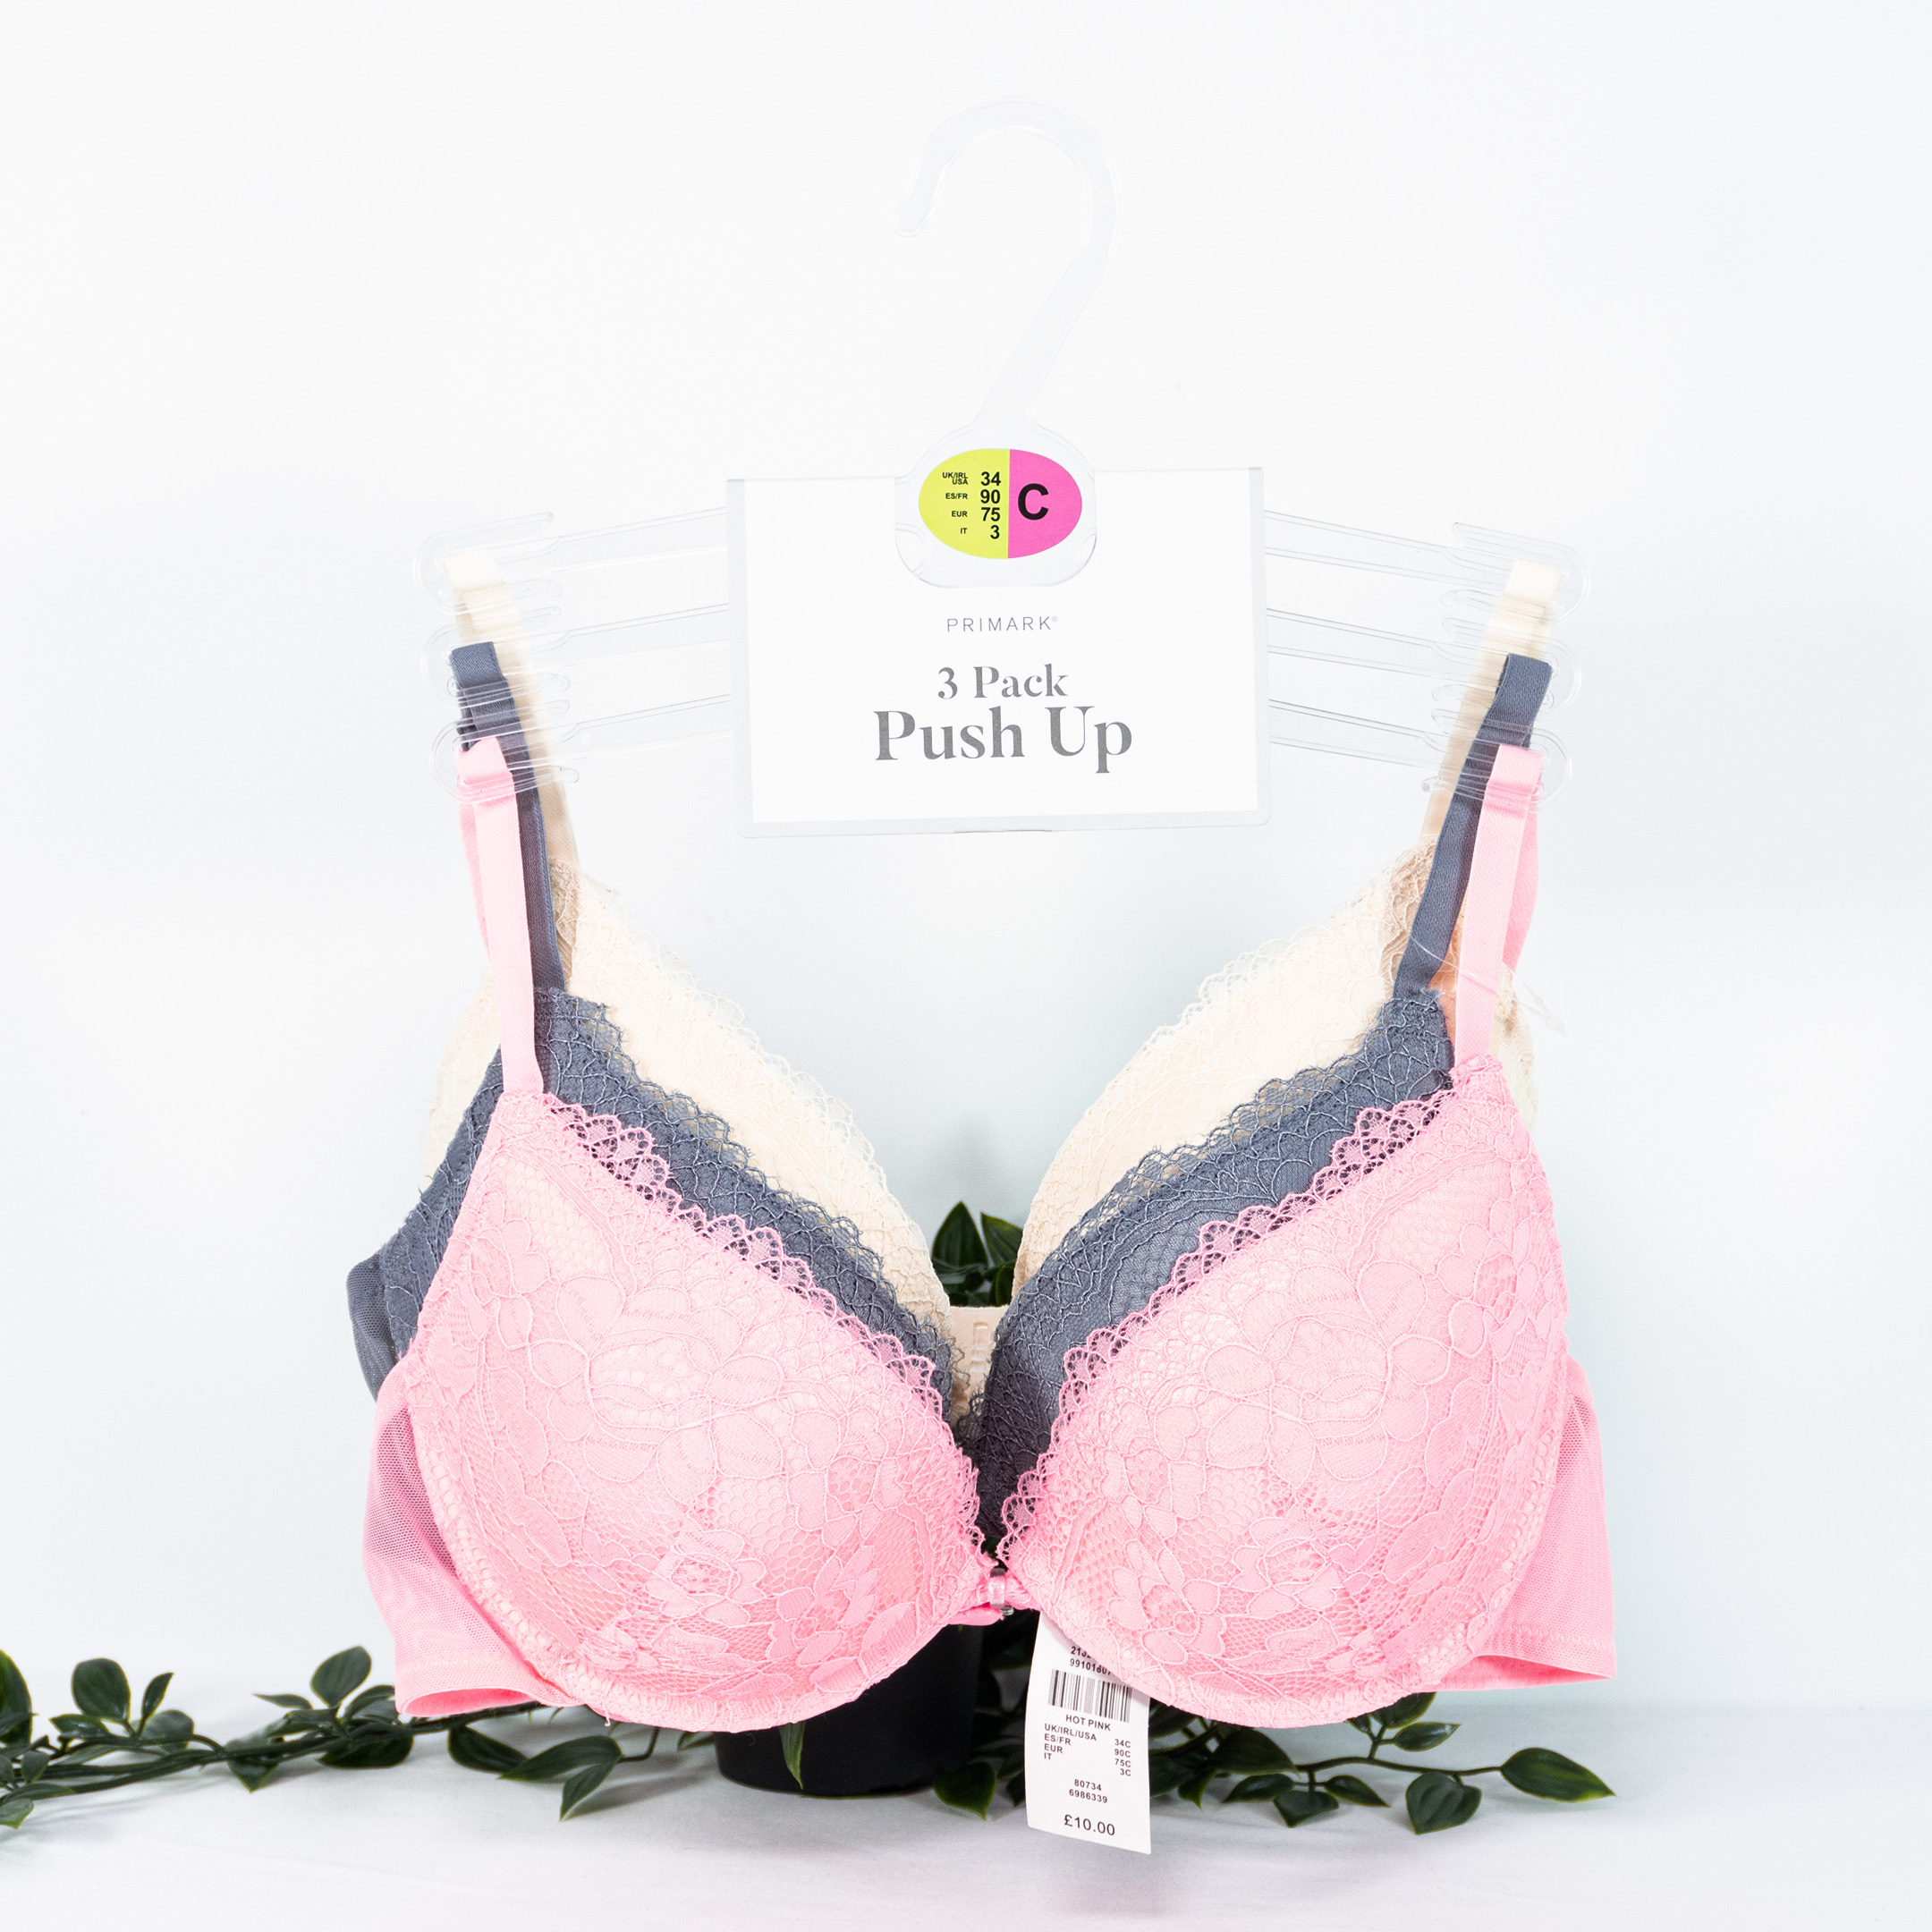 CLEARANCE!! - PRIMARK T-Shirt Bra Push Up (3 Pack) - 34D